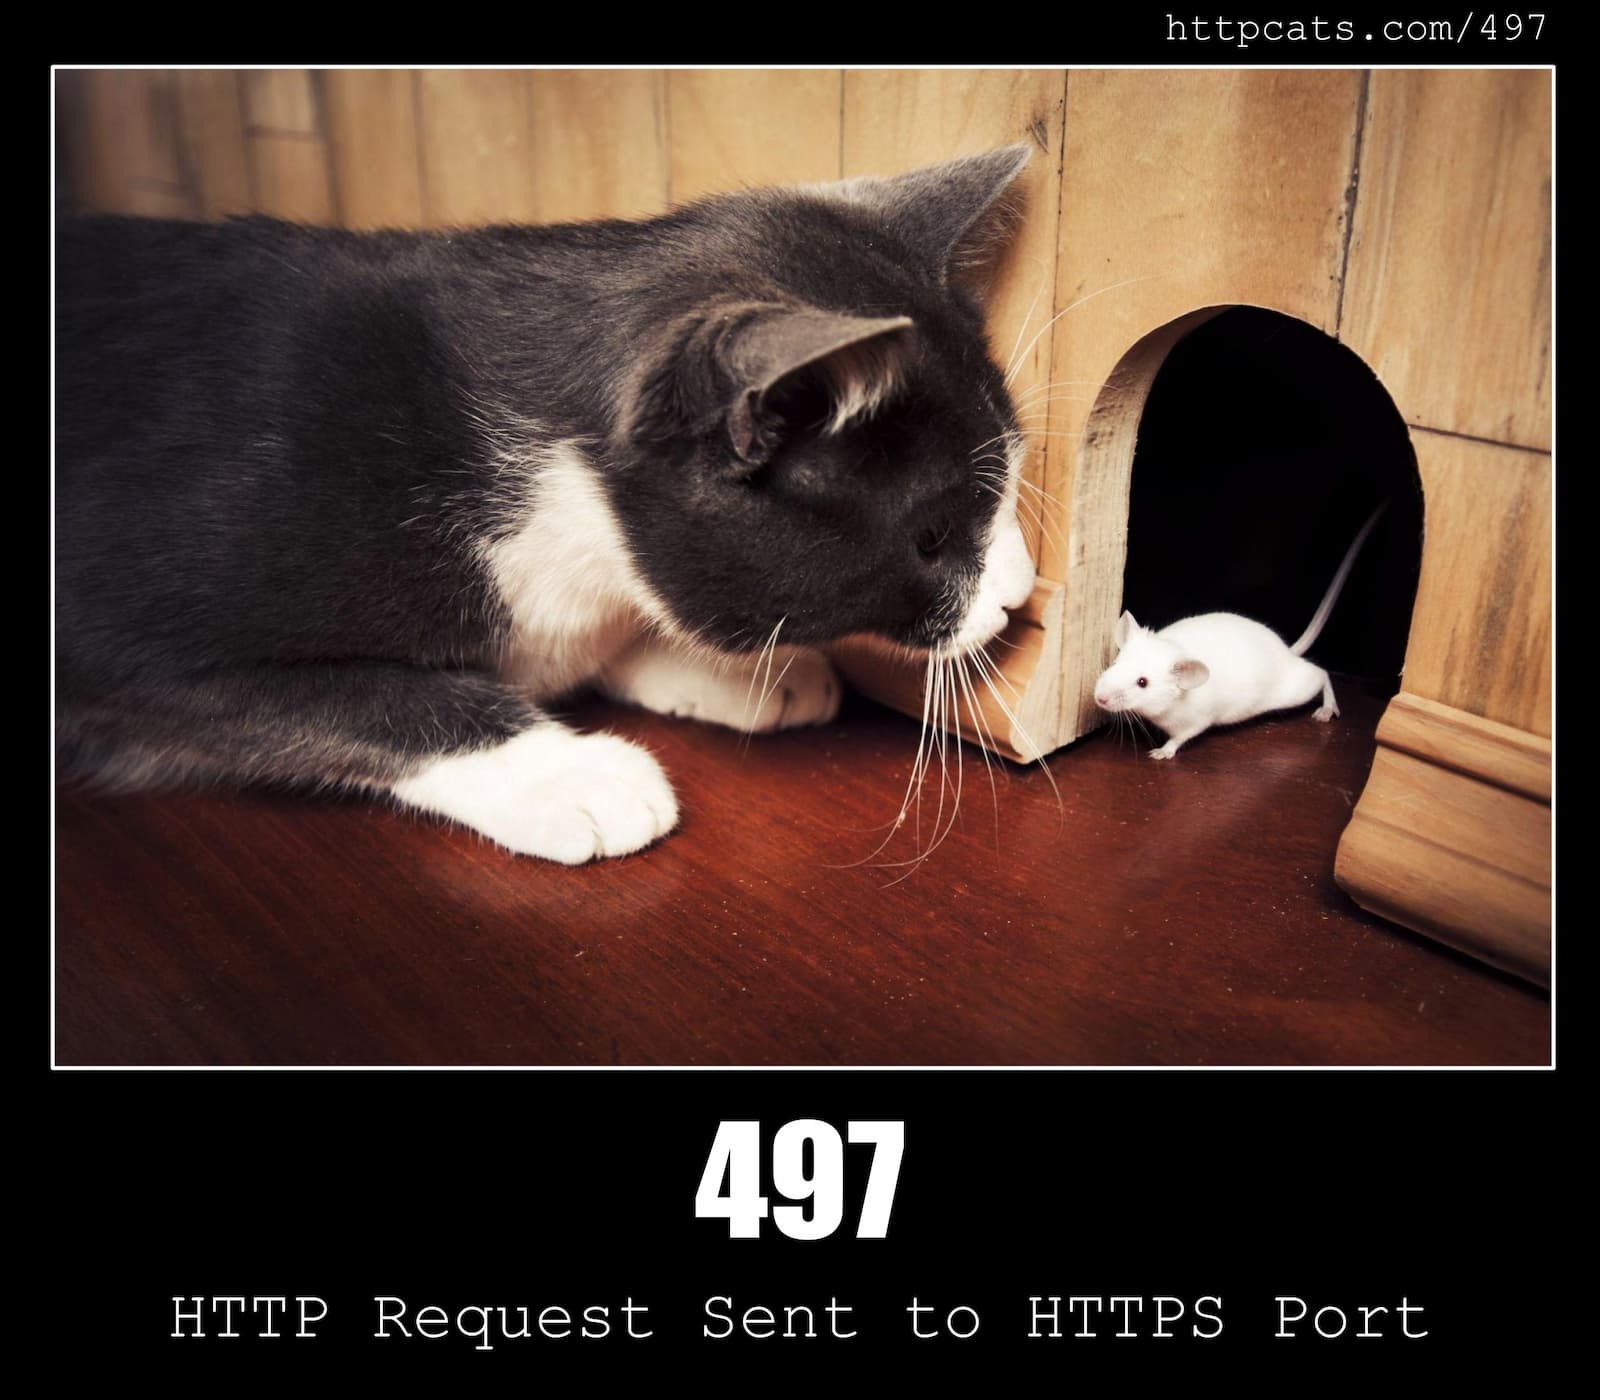 HTTP Status Code 497 HTTP Request Sent to HTTPS Port & Cats